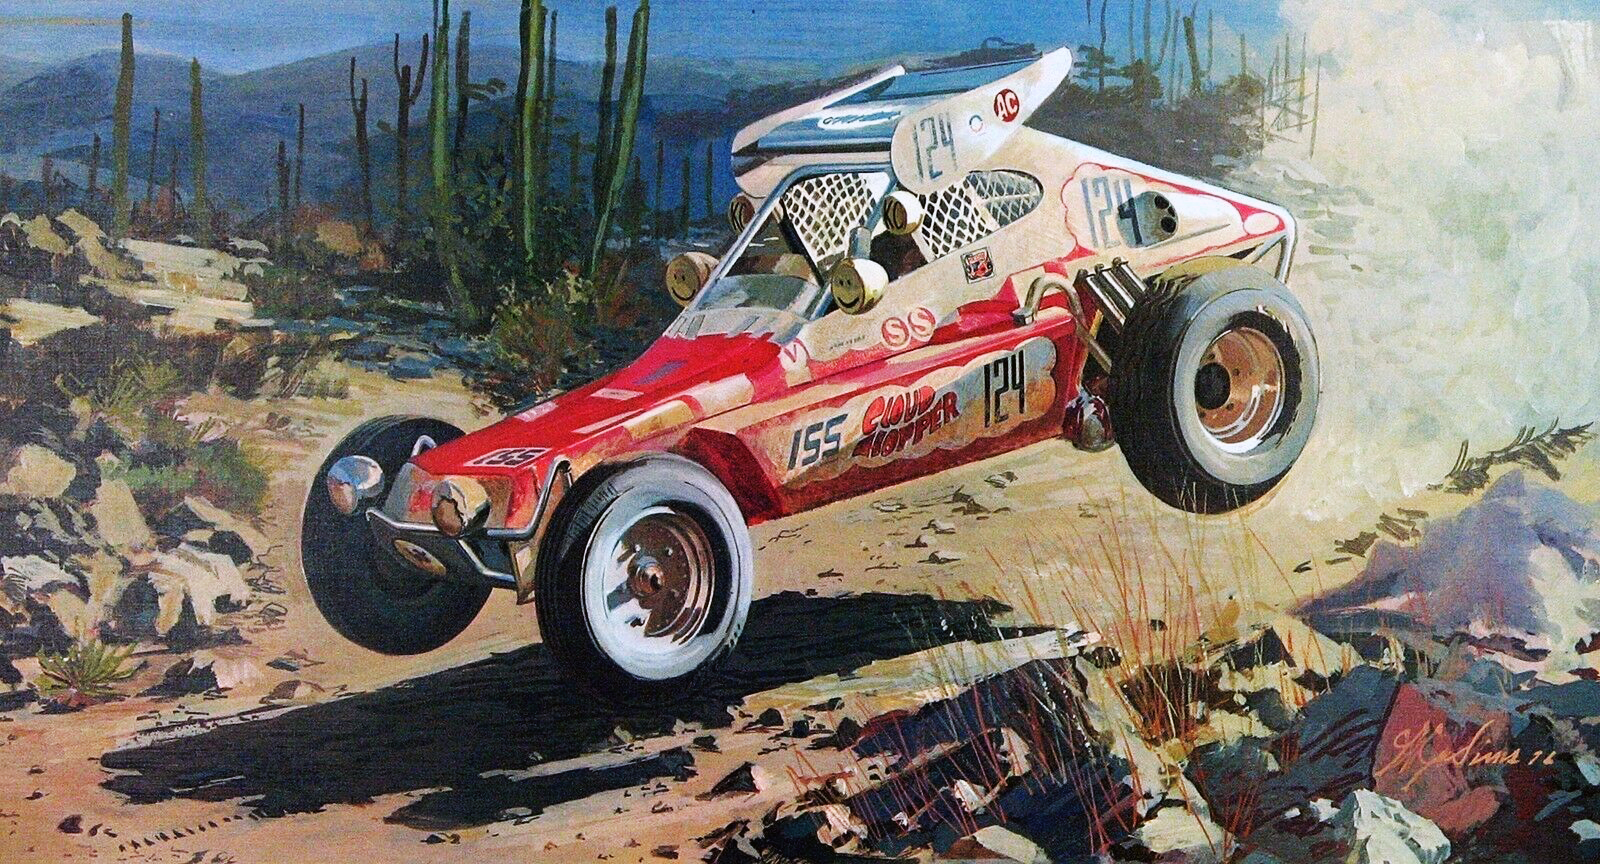 1976 Baja 1000 Off-Road Event — Won by Malcolm Smith and Bud Feldkamp: Illustrated by William J. Sims